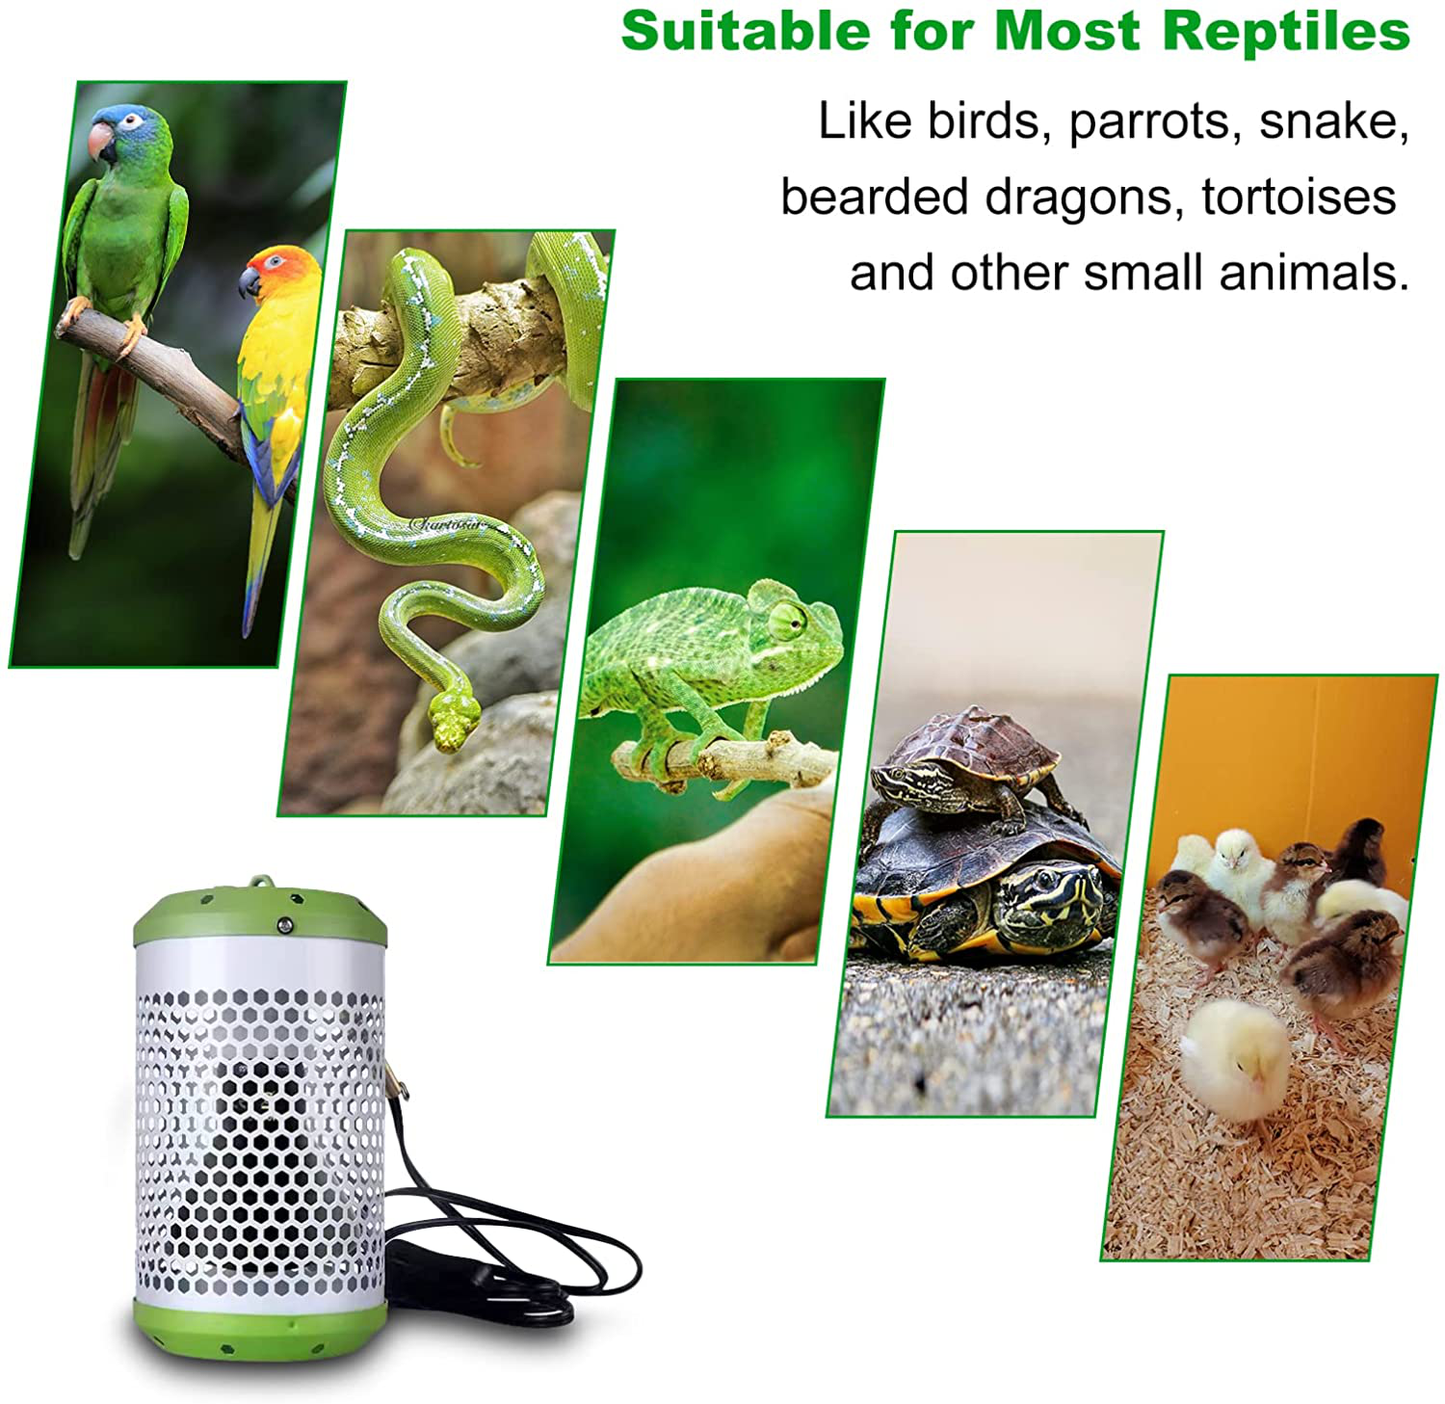 Reptile Anti-Scald Lamp Covers Heater Guard with 100 Watt Infrared Ceramic Heat Lamp,For Turtle, Snakes, Lizards, Frogs, Chicks,Switch&Anti-Biting Hanging Hook Design (Large 100W) Animals & Pet Supplies > Pet Supplies > Reptile & Amphibian Supplies > Reptile & Amphibian Substrates Kaduocom   